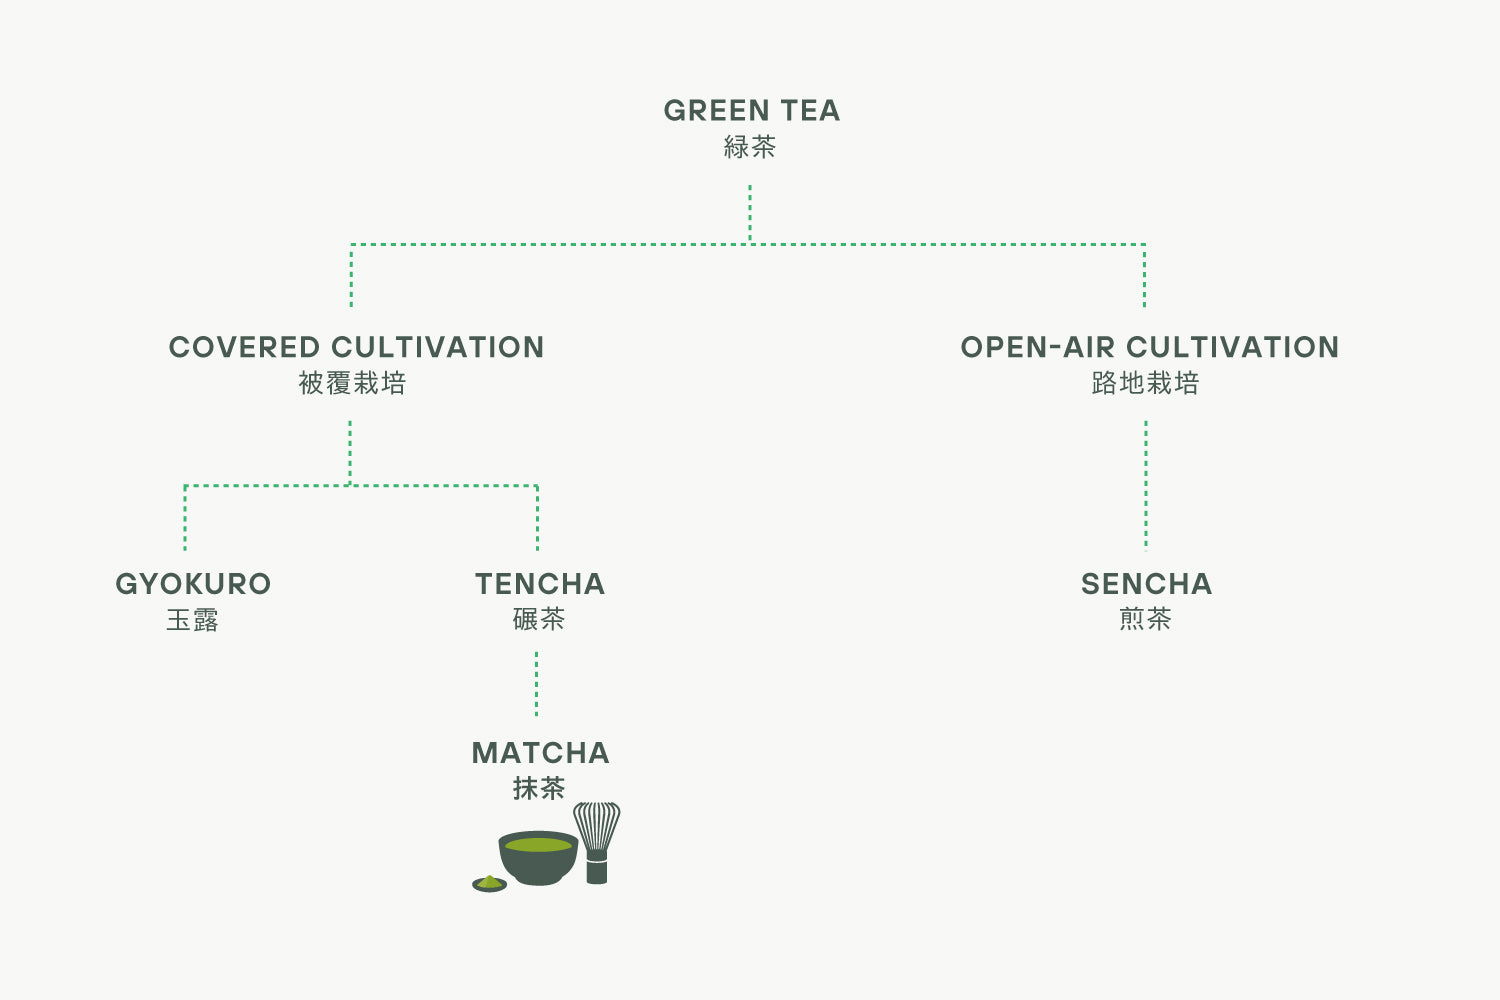 A chart delineating which green teas are shade-grown and which are not. (Tencha is shade-grown.)